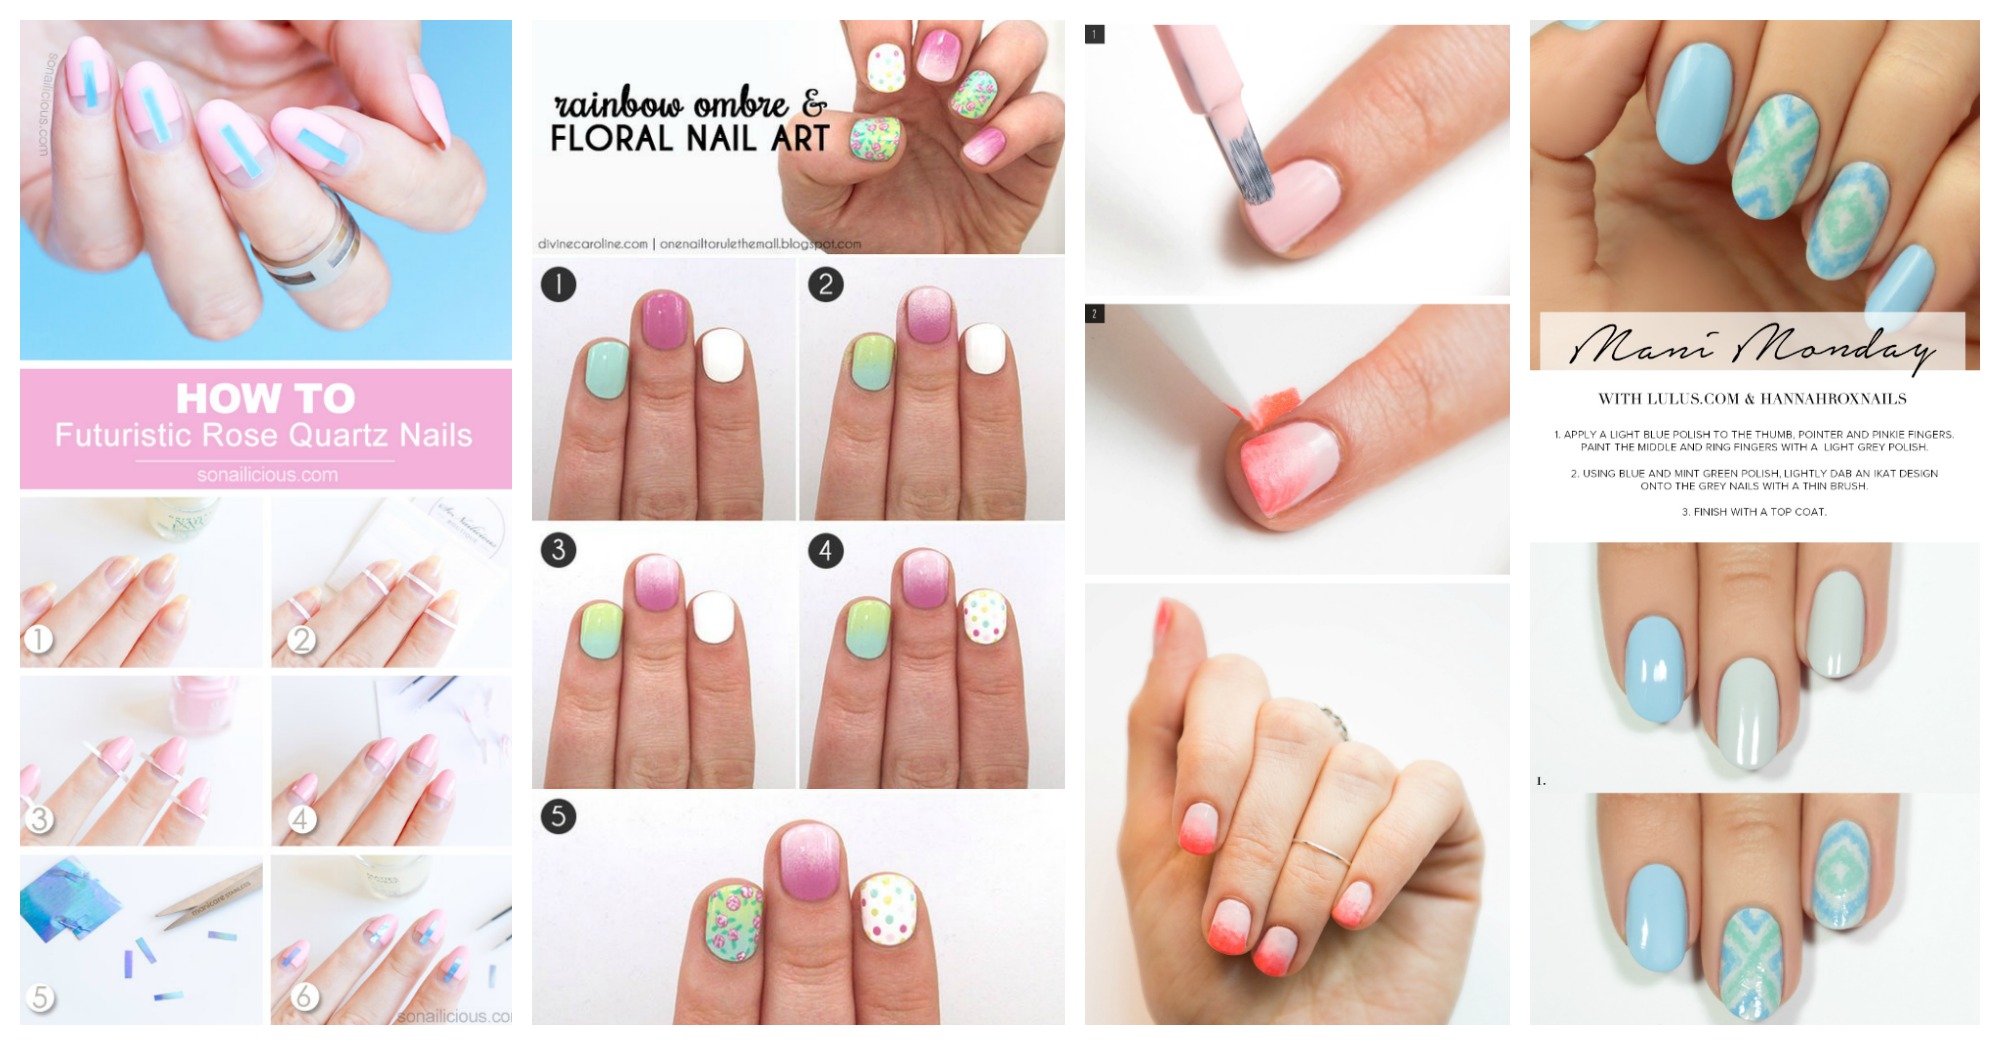 7. Step-by-Step Nail Art Tutorials on Tumblr - wide 6